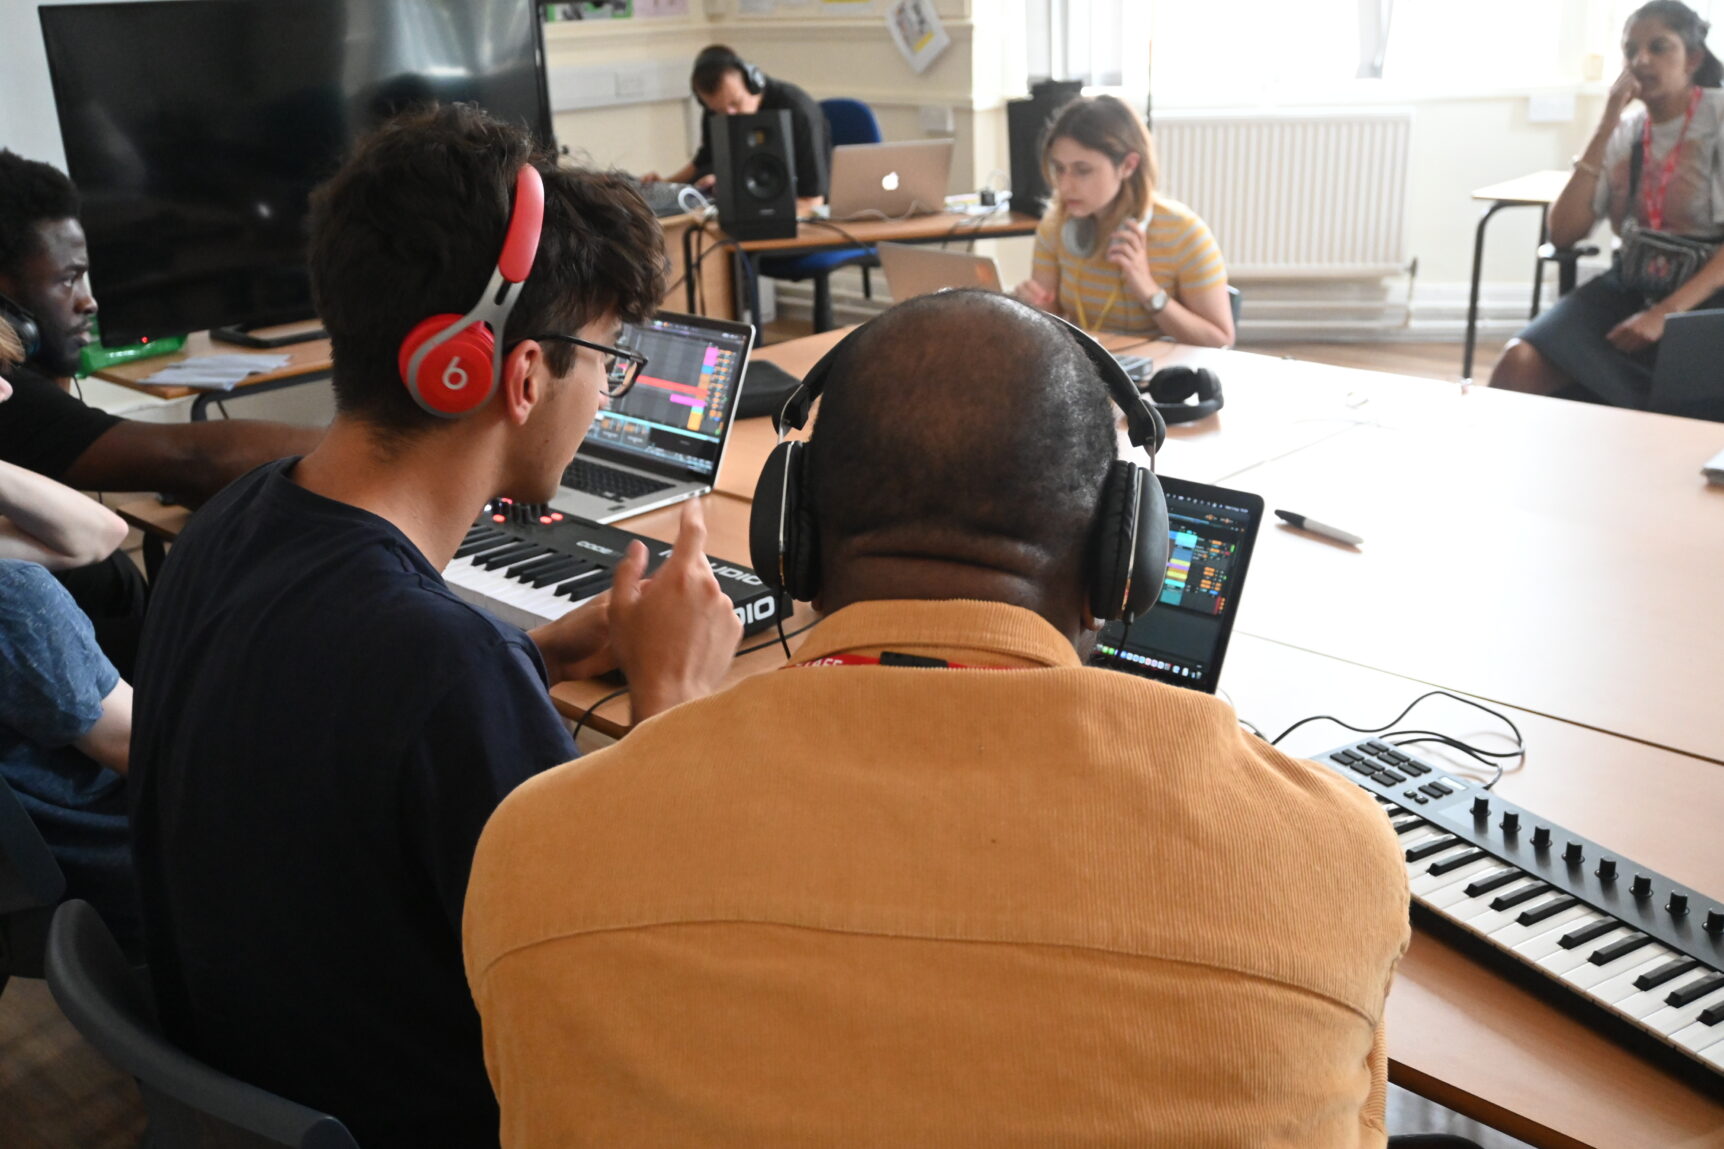 People with headphones sit together around a large table, editing music using computers and software, intently focussing on the task.